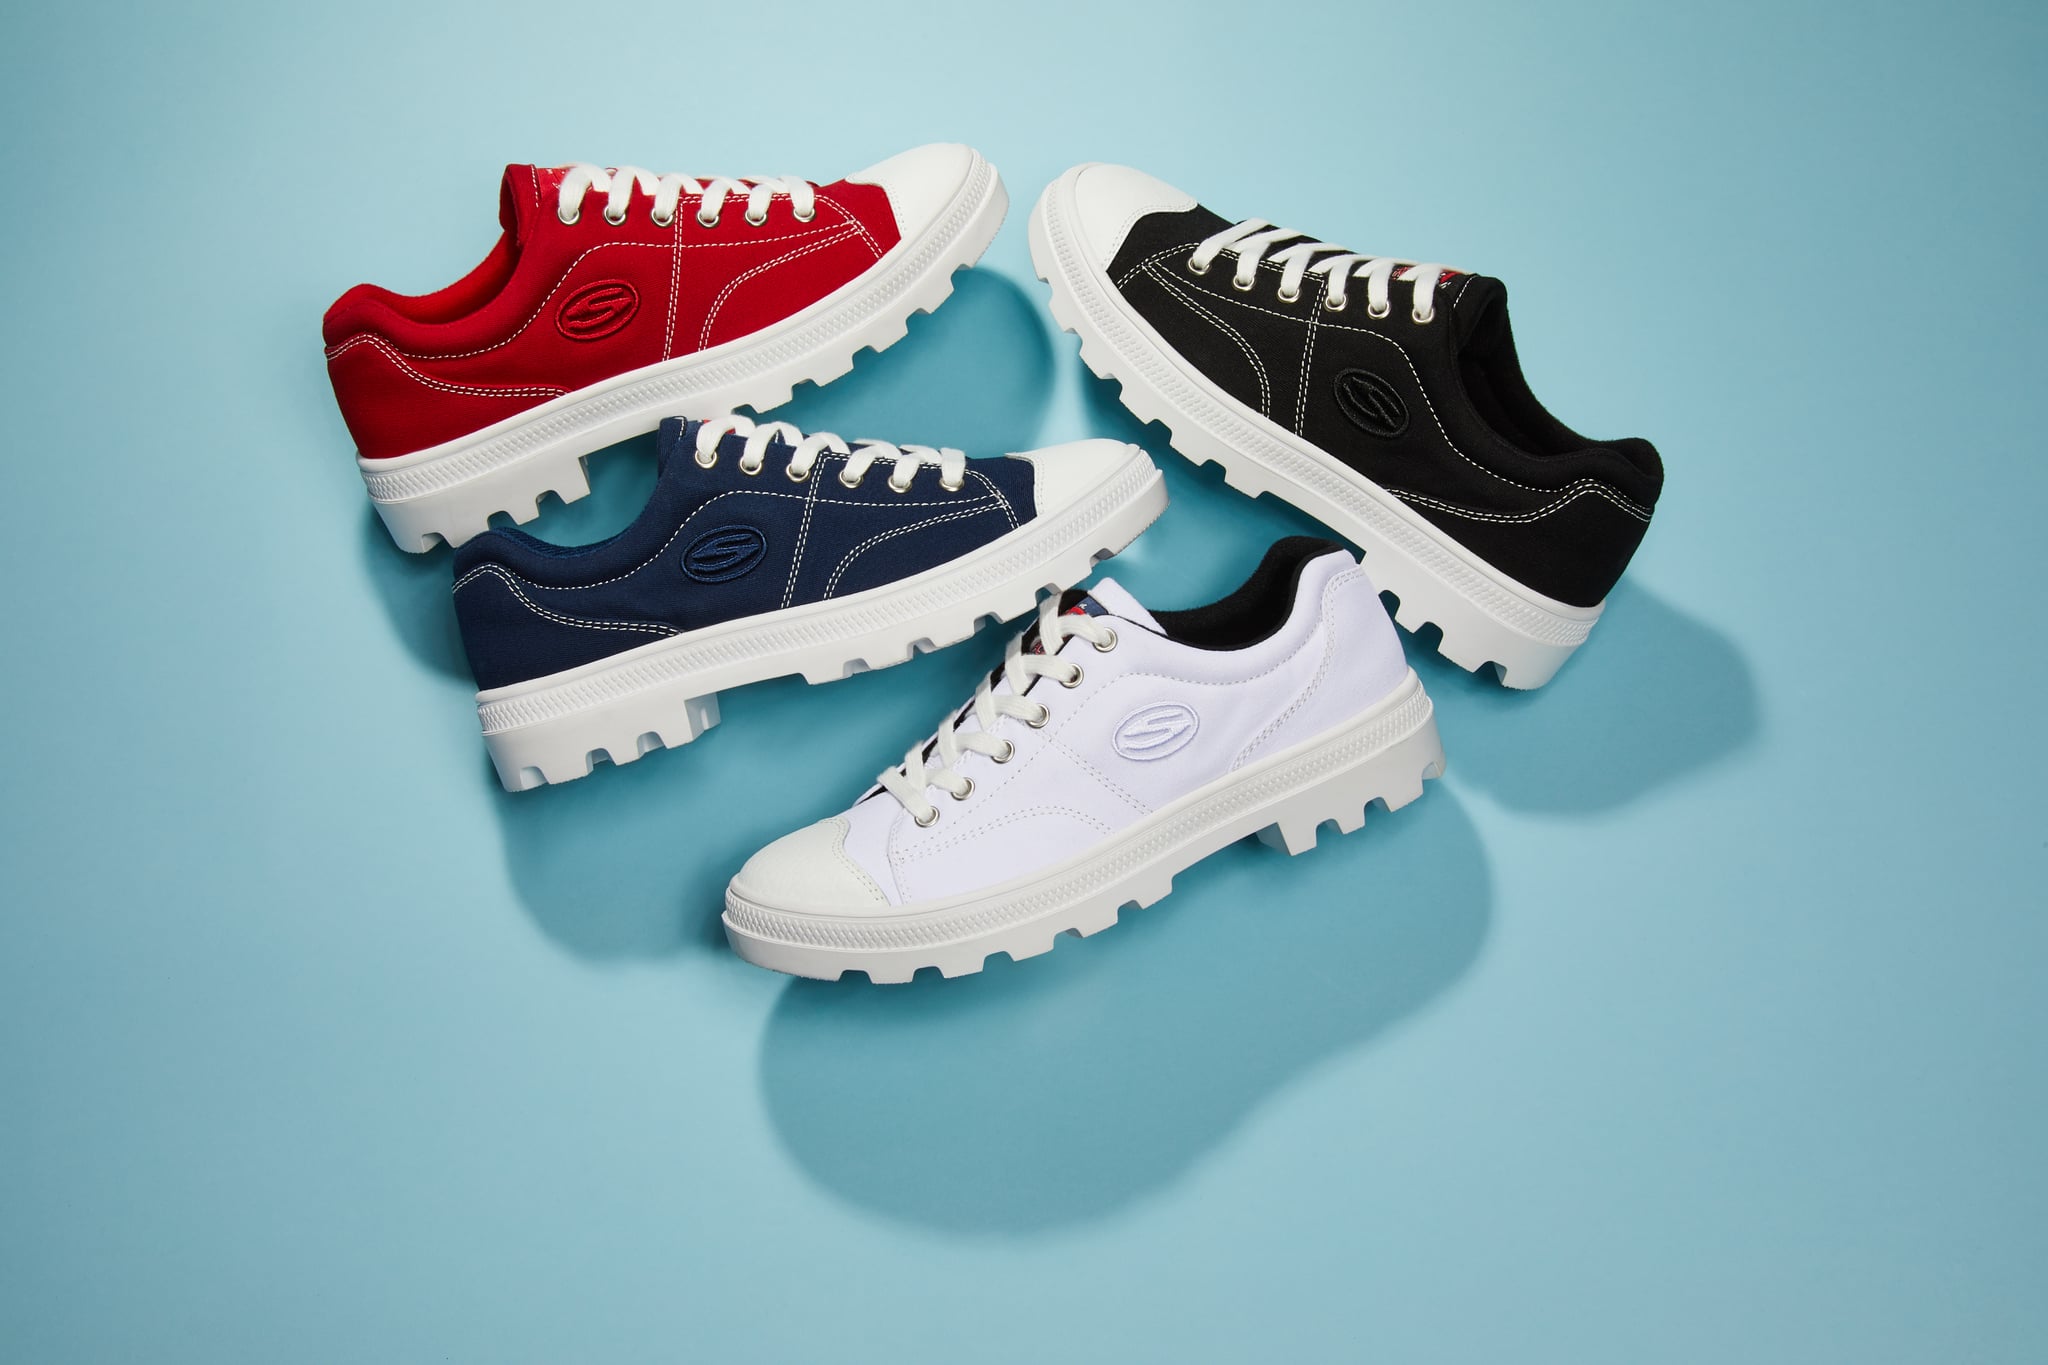 Skechers Sneakers Collection 2019 | POPSUGAR Fashion